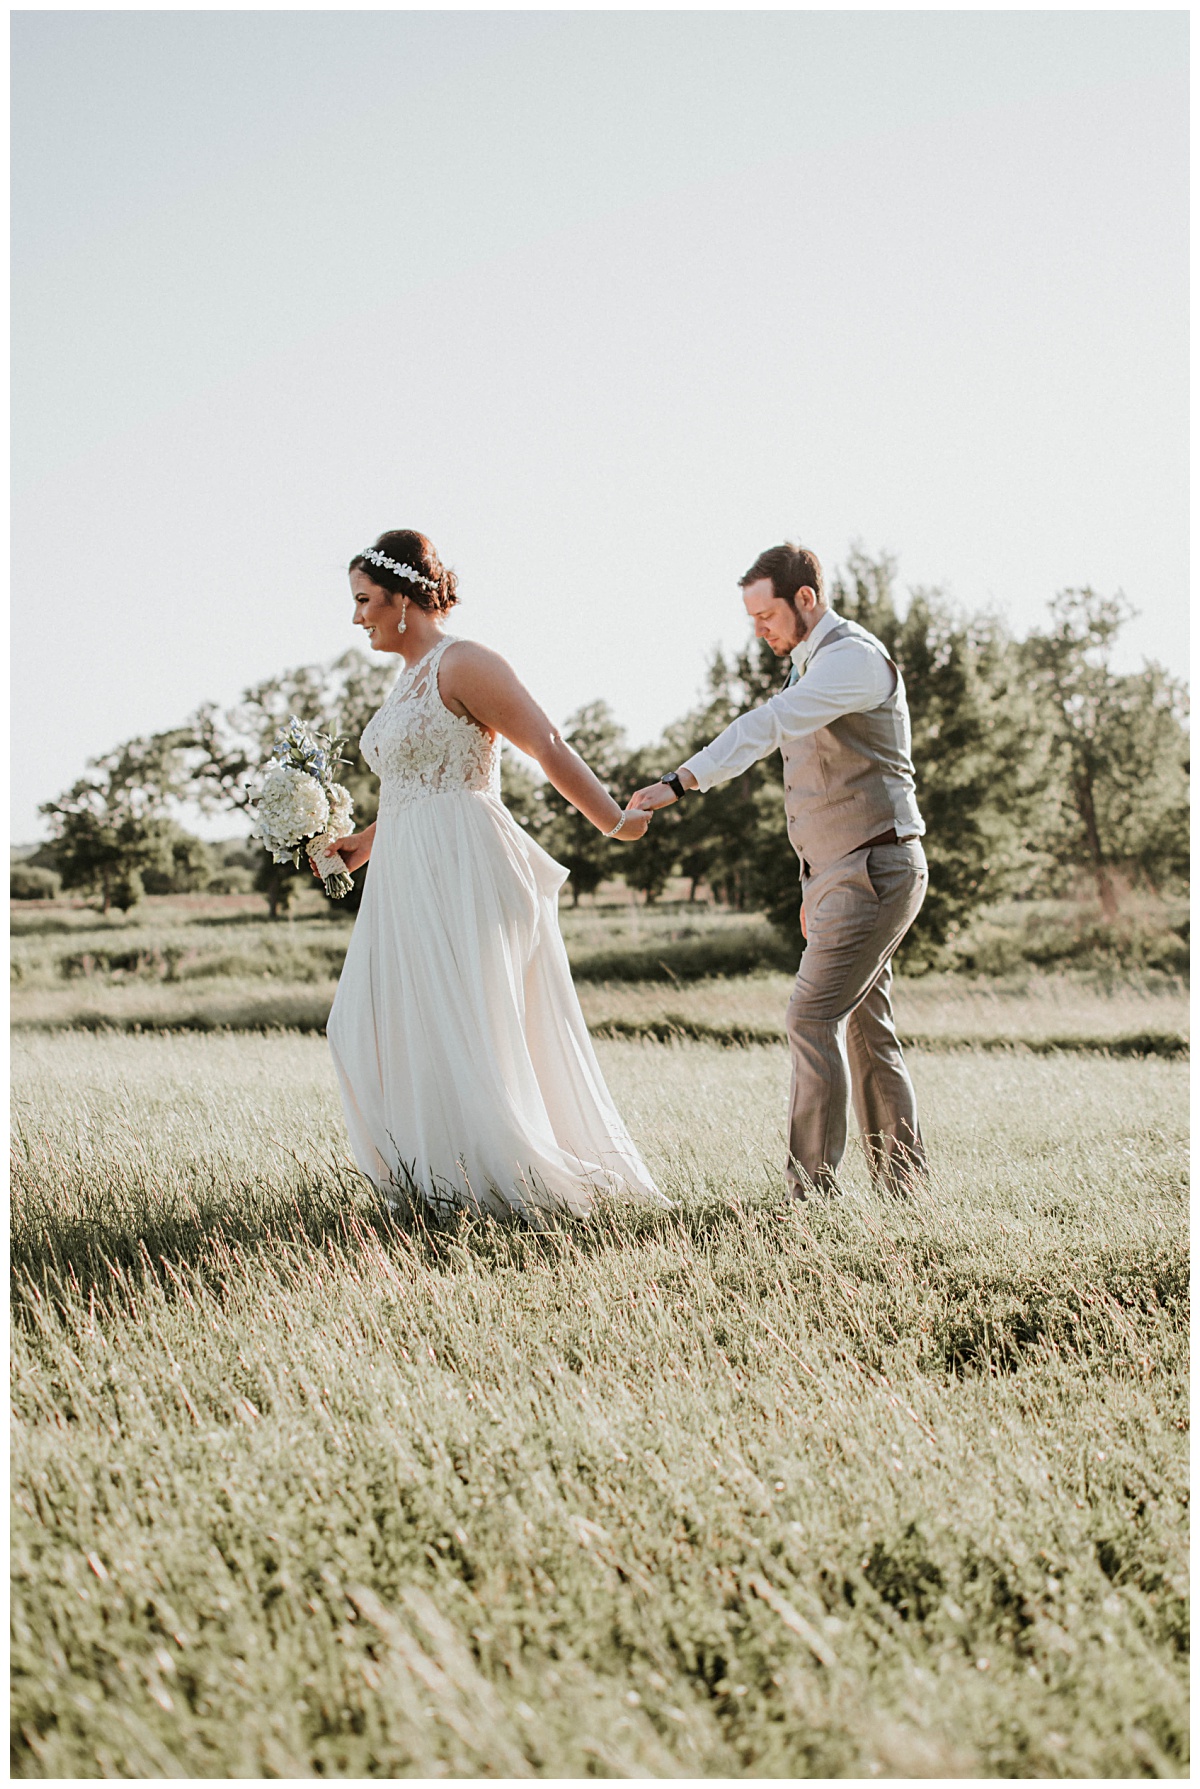 The couple romping through the terrain | Emery's Buffalo Creek in the greater Houston area 